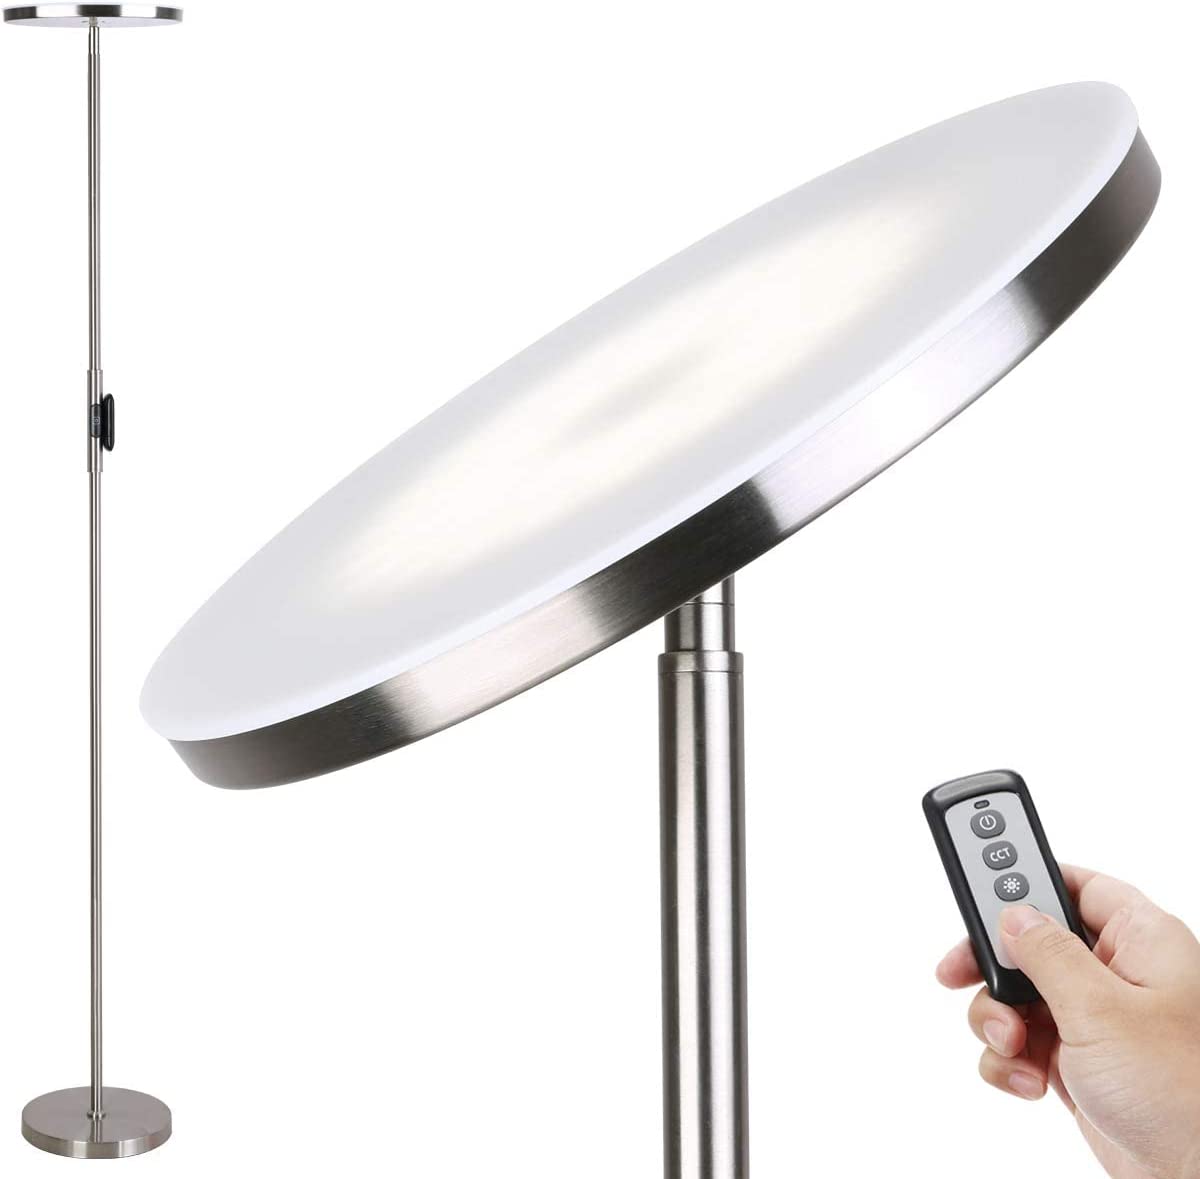 Floor Lamp,30W/2400LM Sky LED Modern Torchiere 3 Color Temperatures Super Bright Floor Lamps-Tall Standing Pole Light with Remote & Touch Control for Living Room,Bed Room,Office (Black)